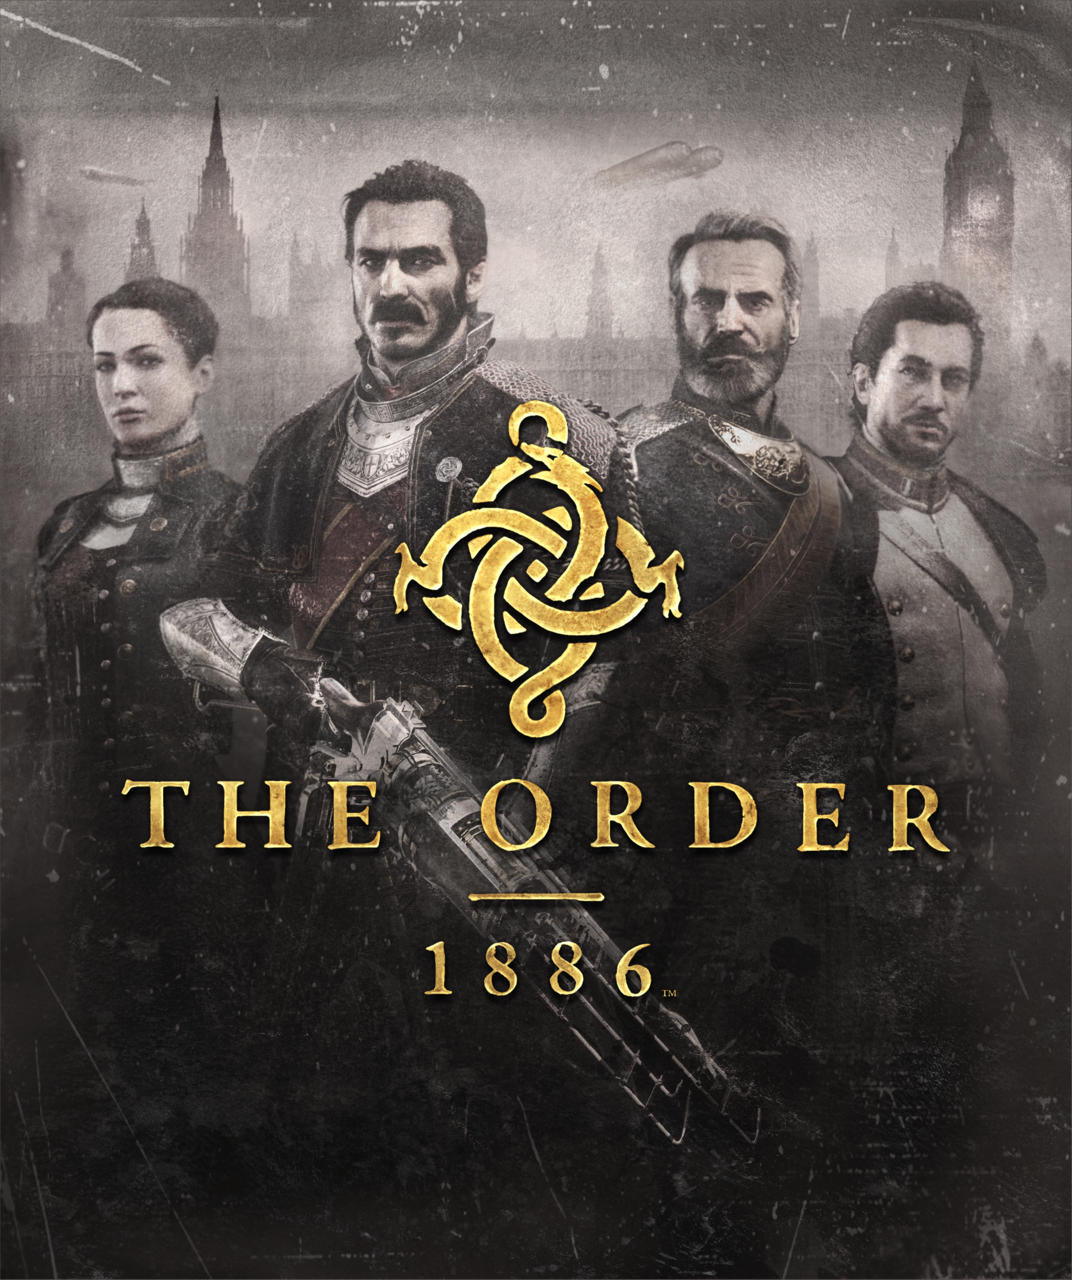 2. The Order: 1886